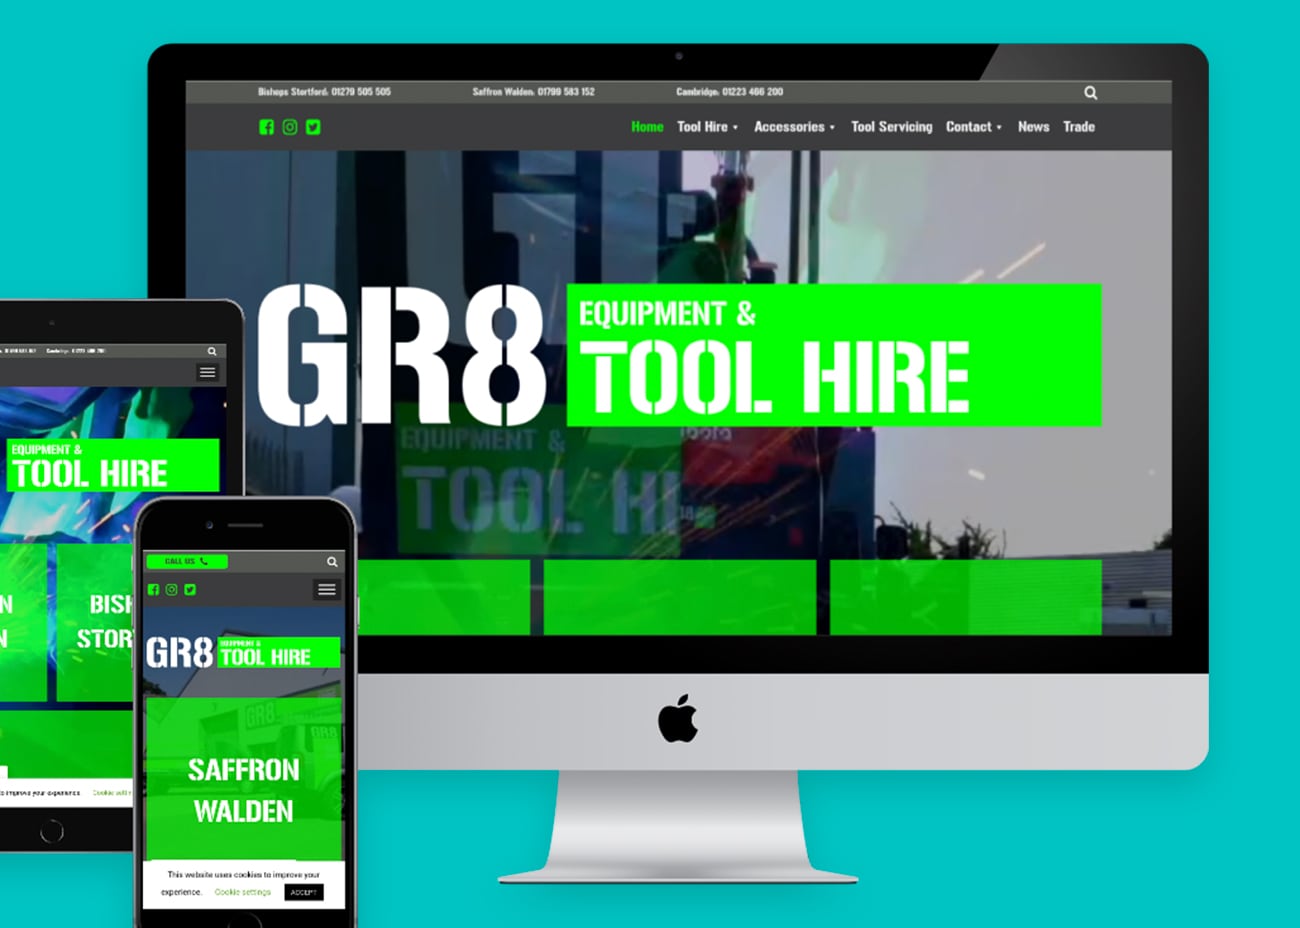 GR8 Tool Hire - Web Design, Marketing and SEO case study image